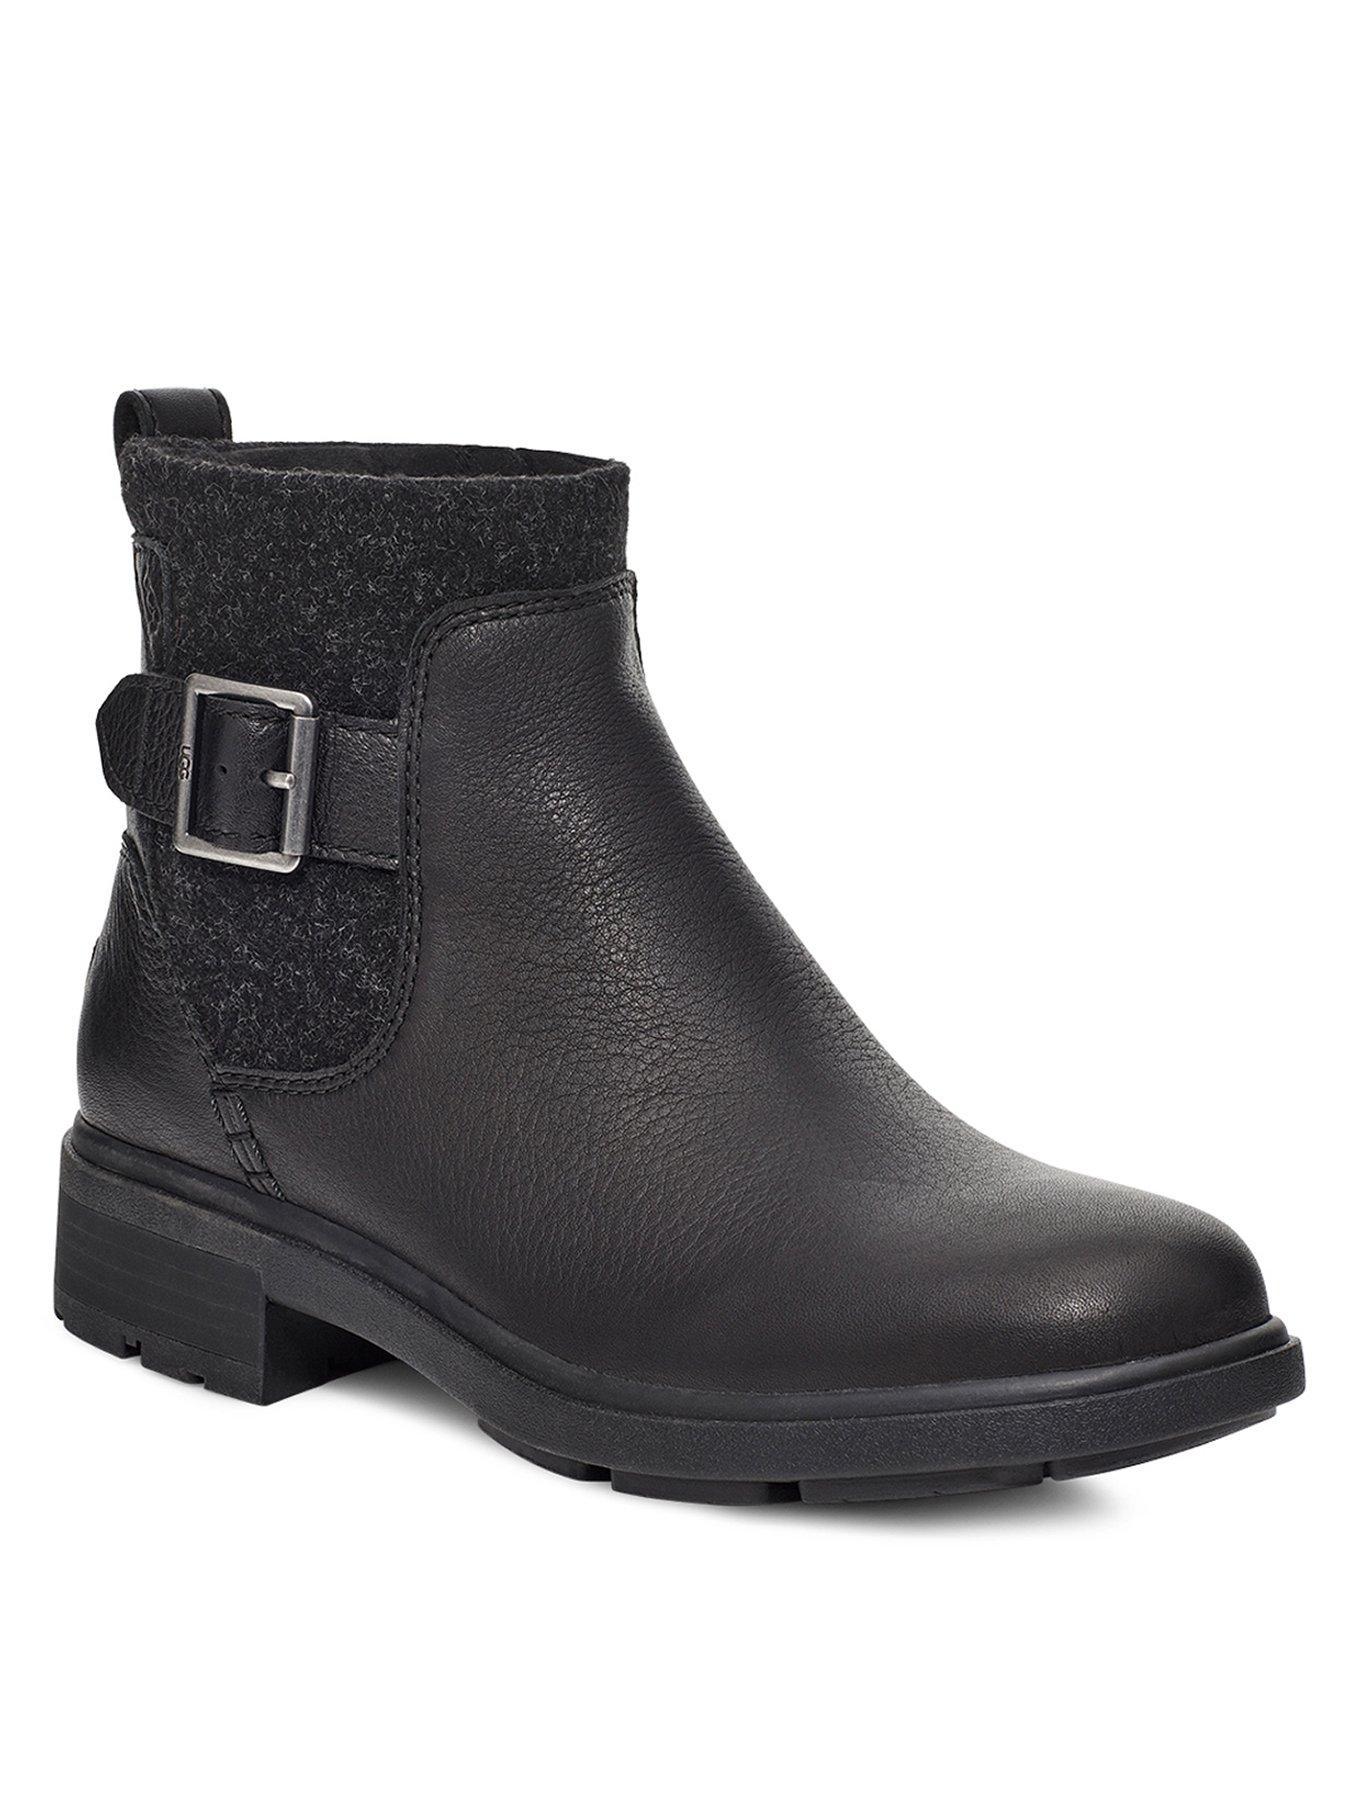 Shoes & boots Harrison Moto Ankle Boot